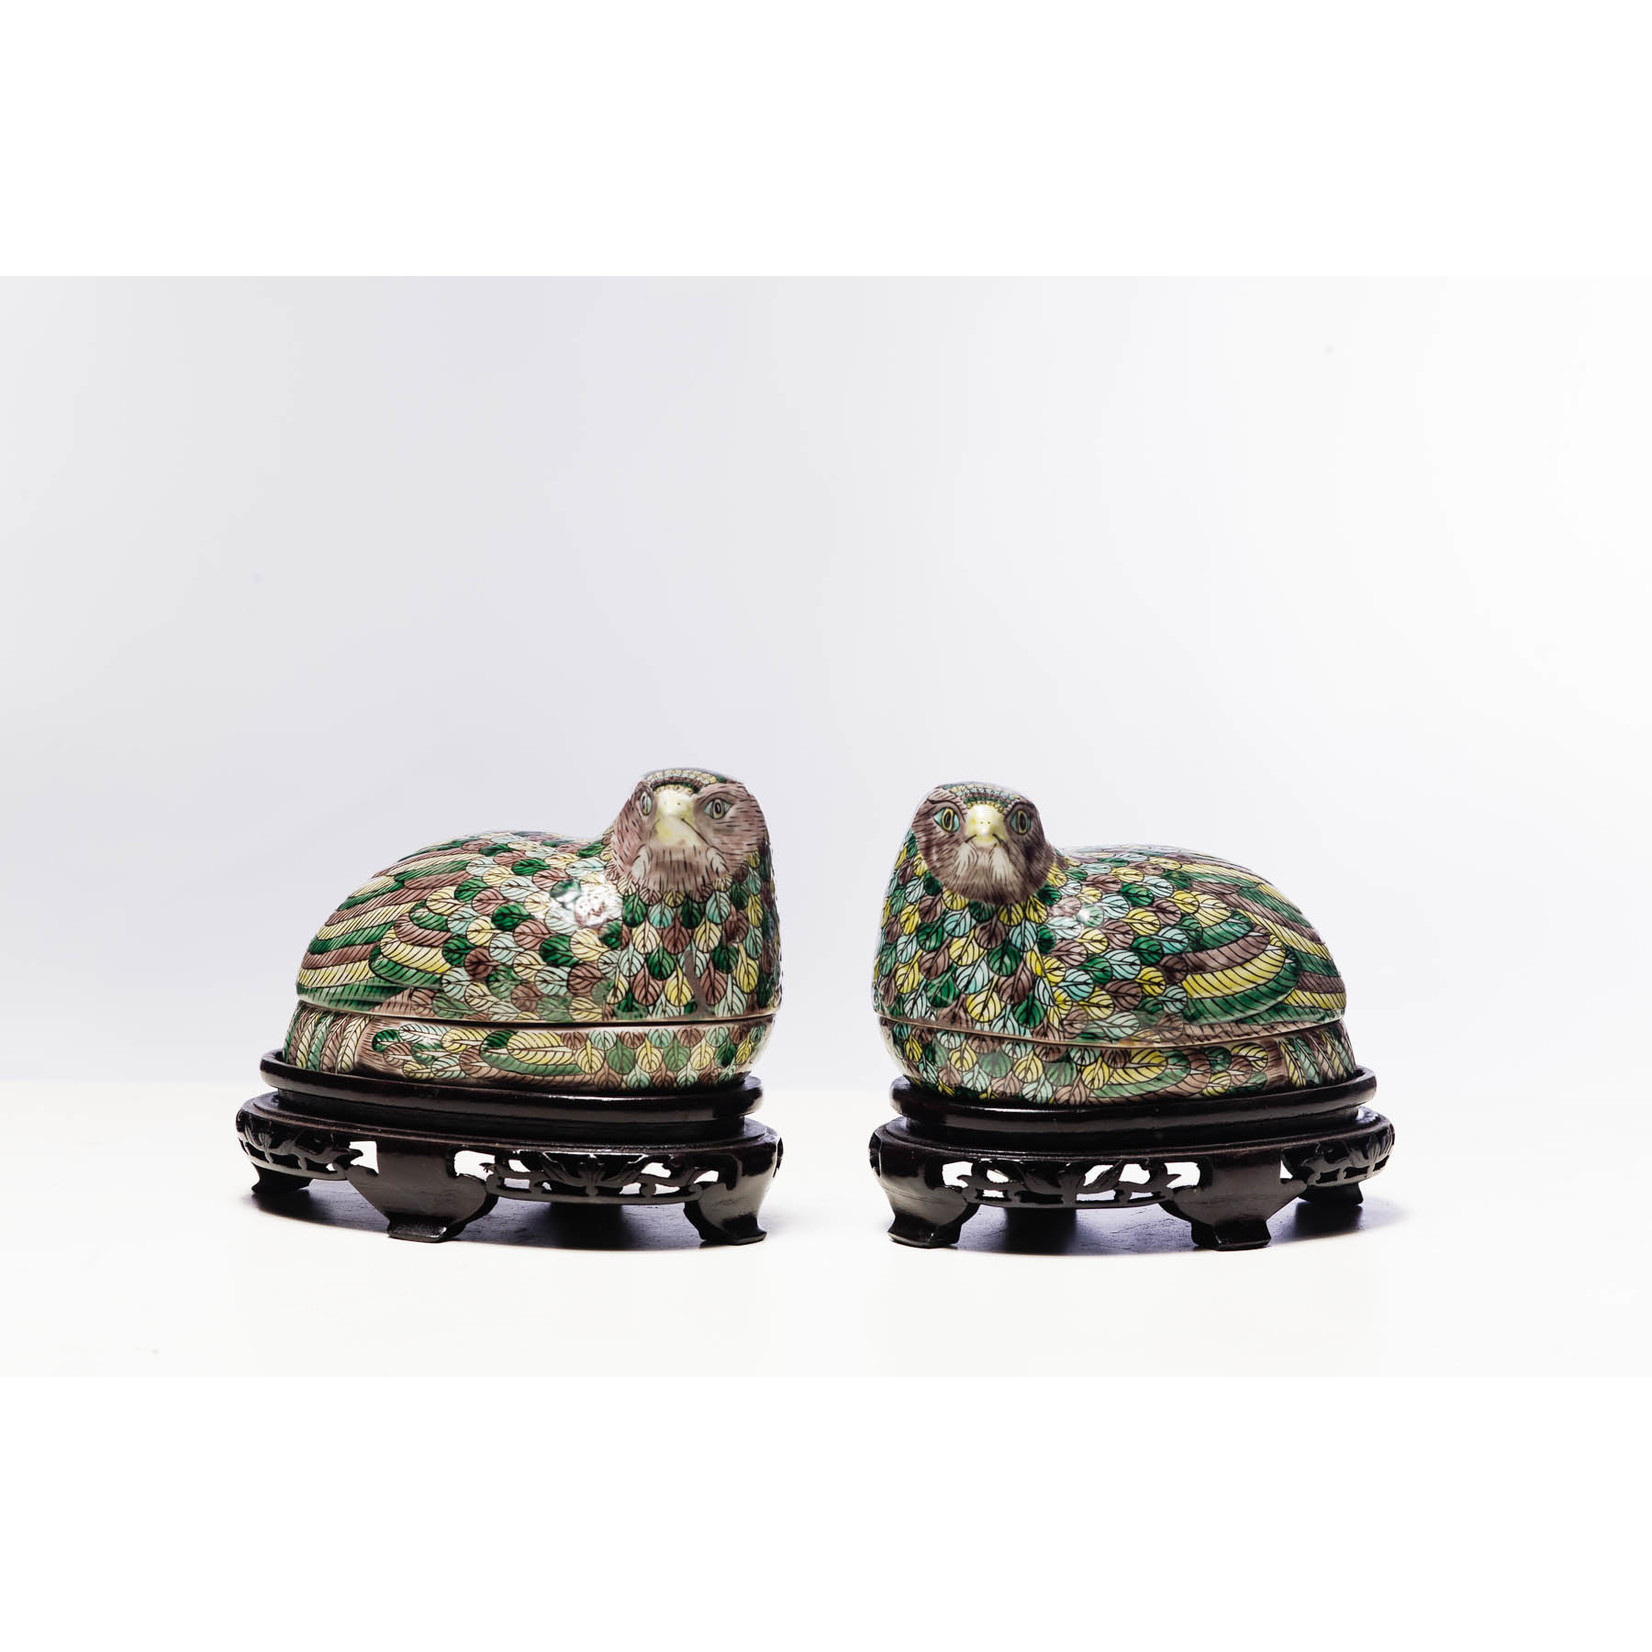 Lawrence Collection Porelain Quail  Box on Carved  Stand  Multicolored, 20th Century, 3.5 x 8 x 5''